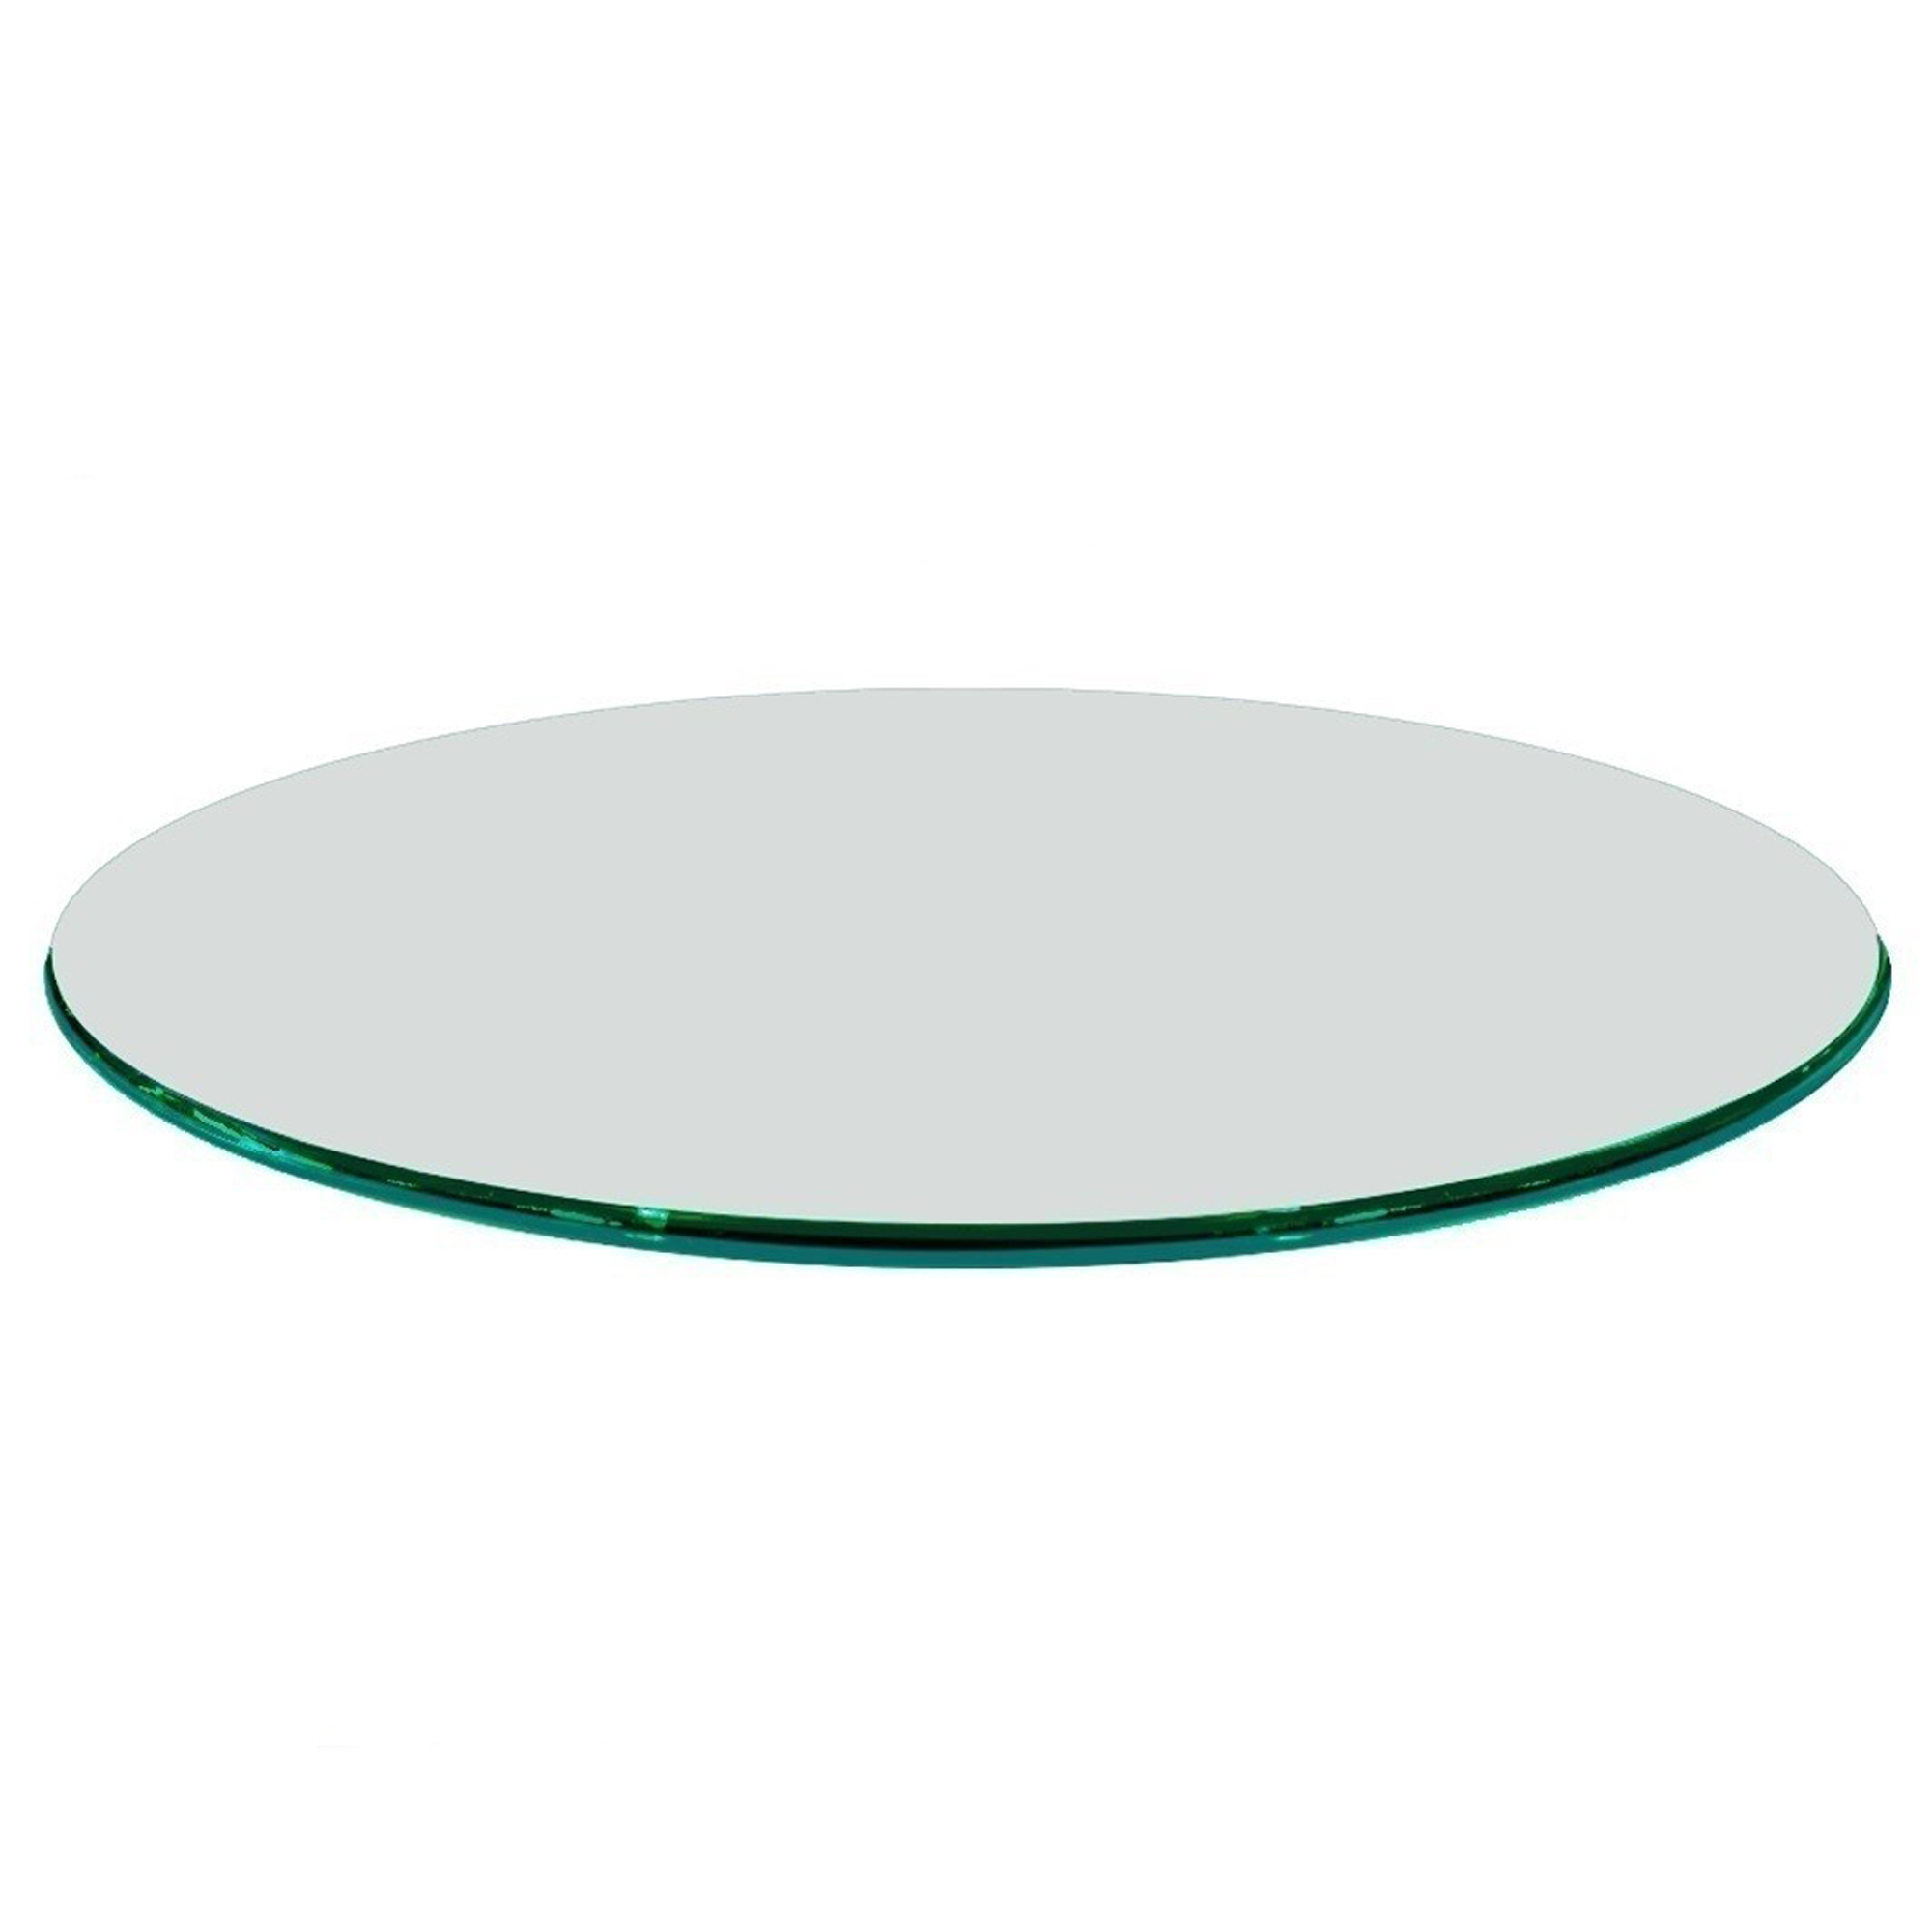 Glass Table Tops Cover, 48 Inch Round Table Top Protector